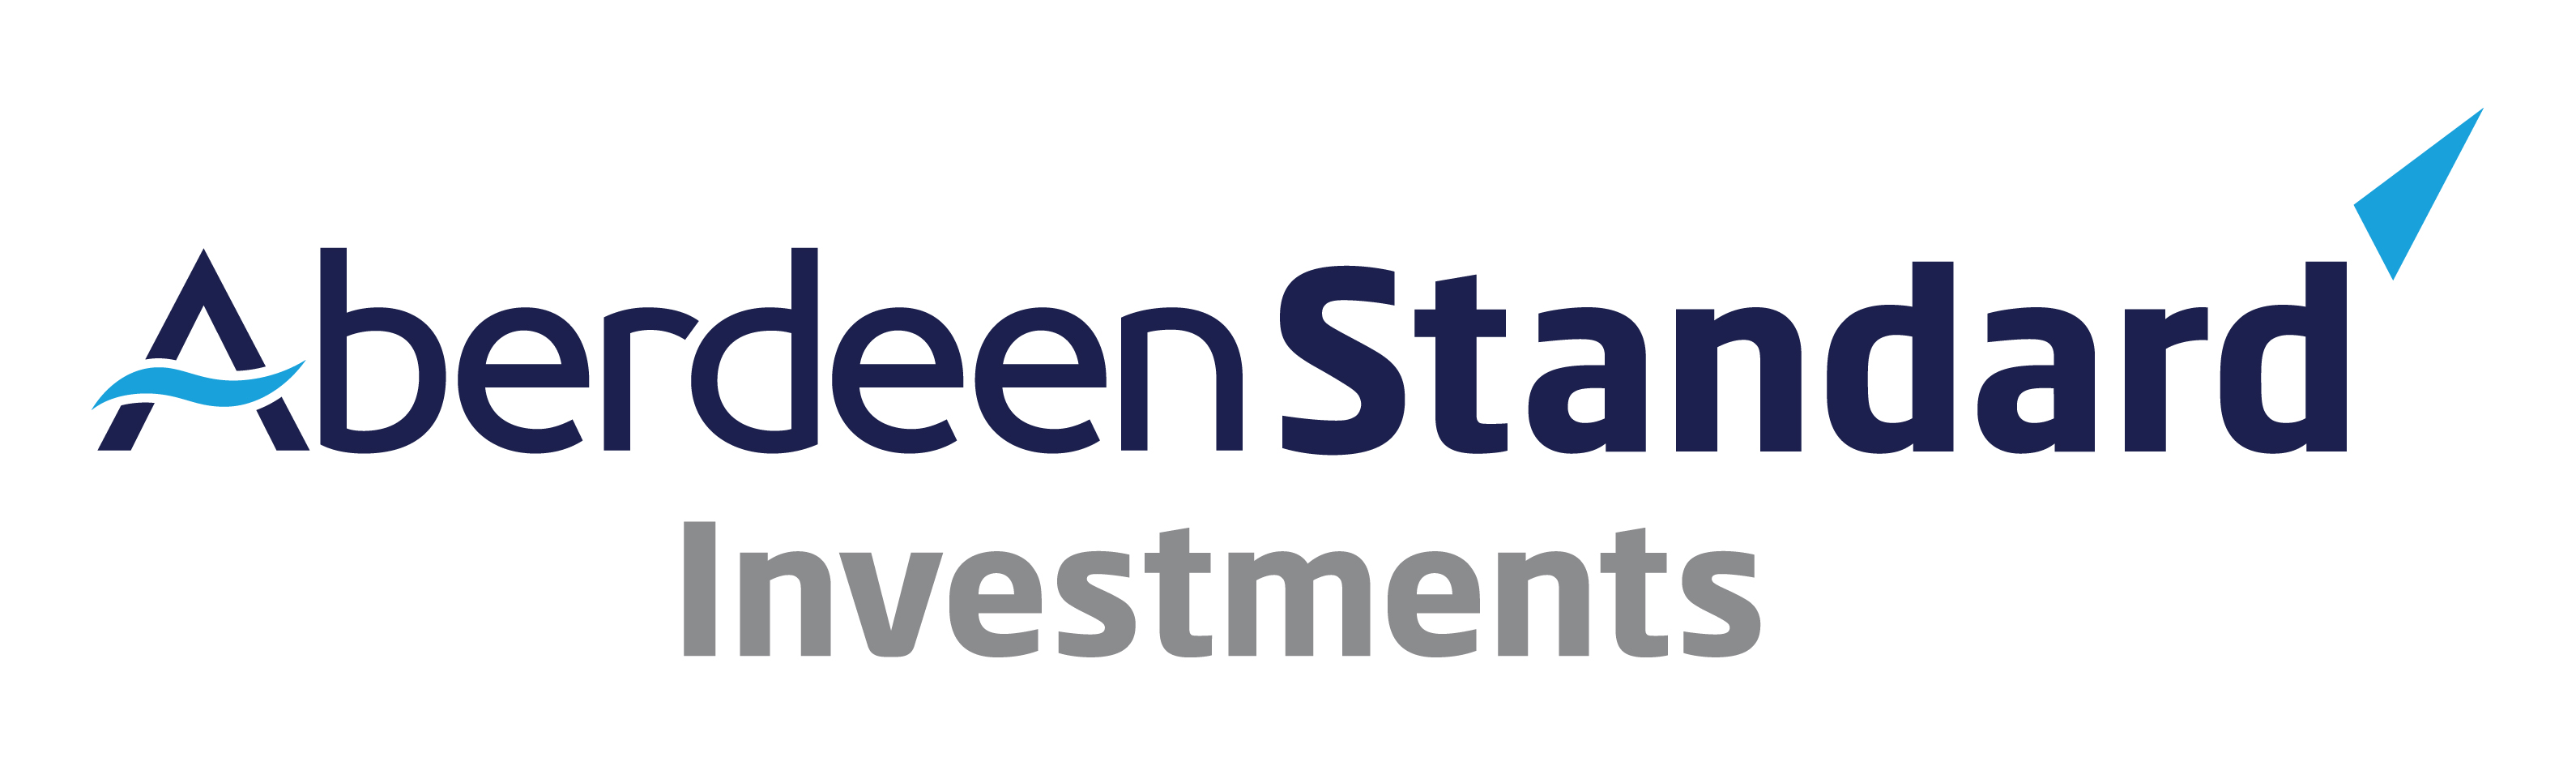 Aberdeen Standard Investments Inc., Monday, July 12, 2021, Press release picture